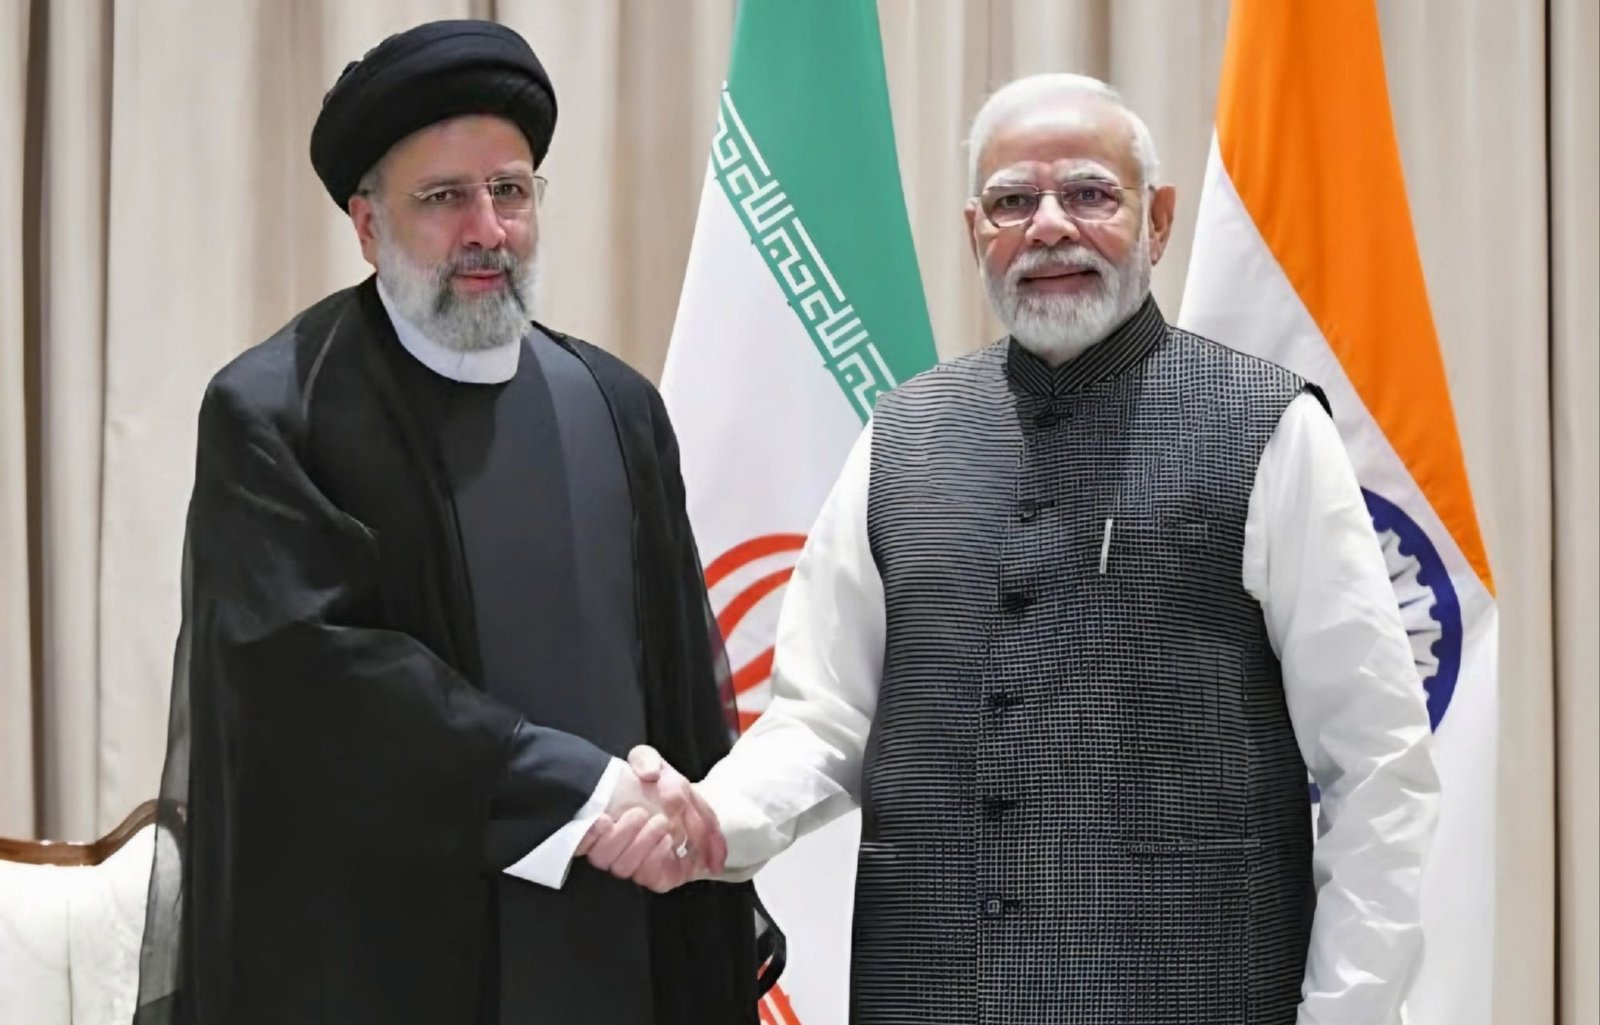 Indians are allowed visa-free entry to Iran